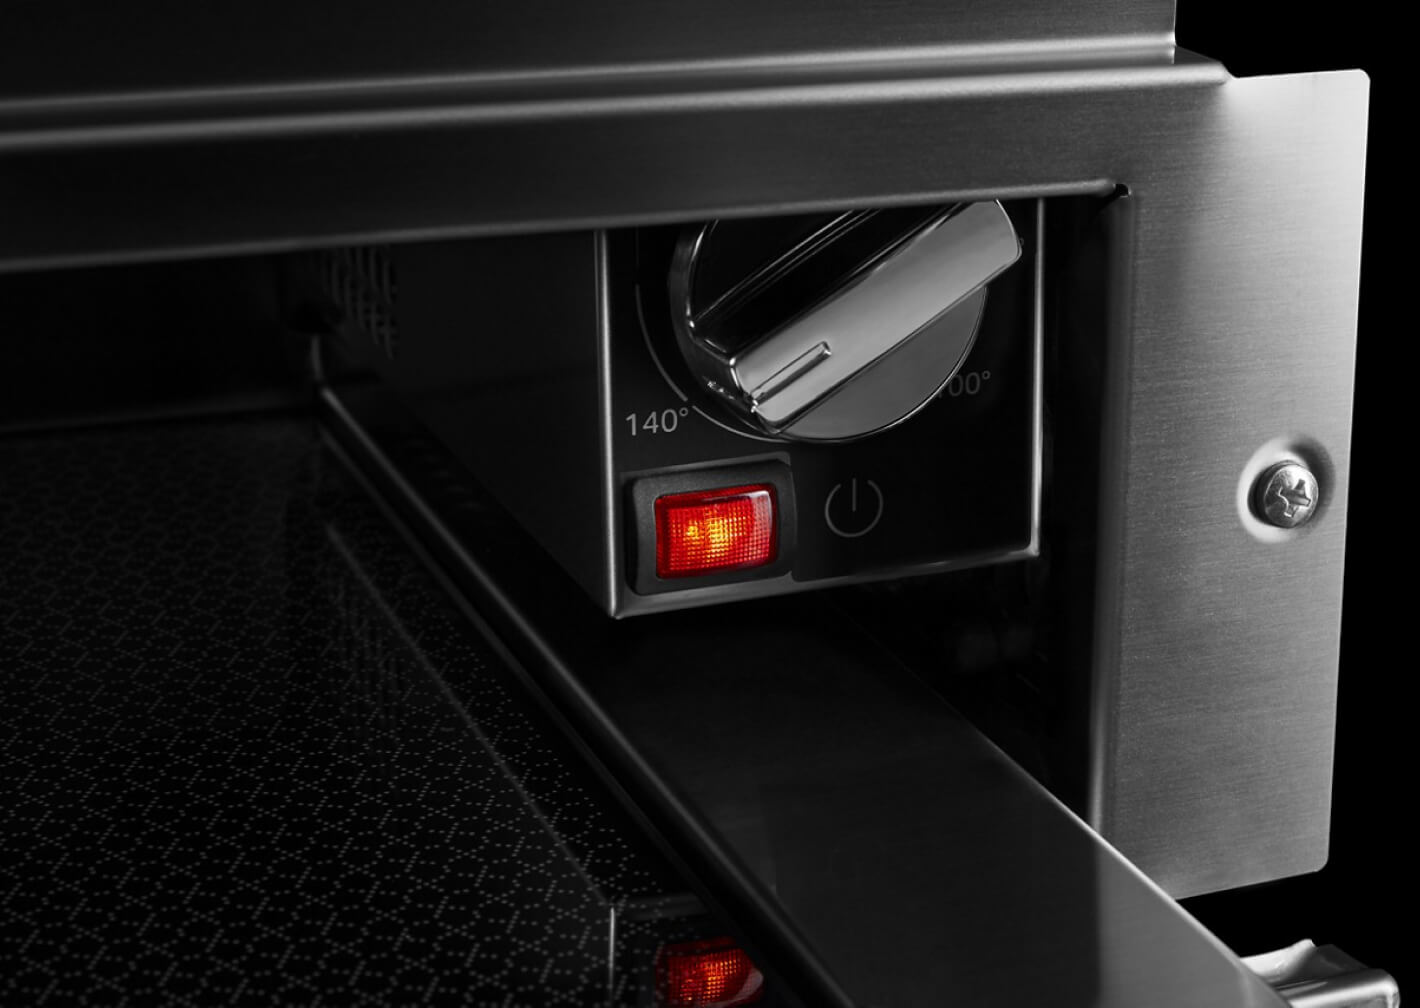 The temperature control knob in a JennAir® warming drawer.